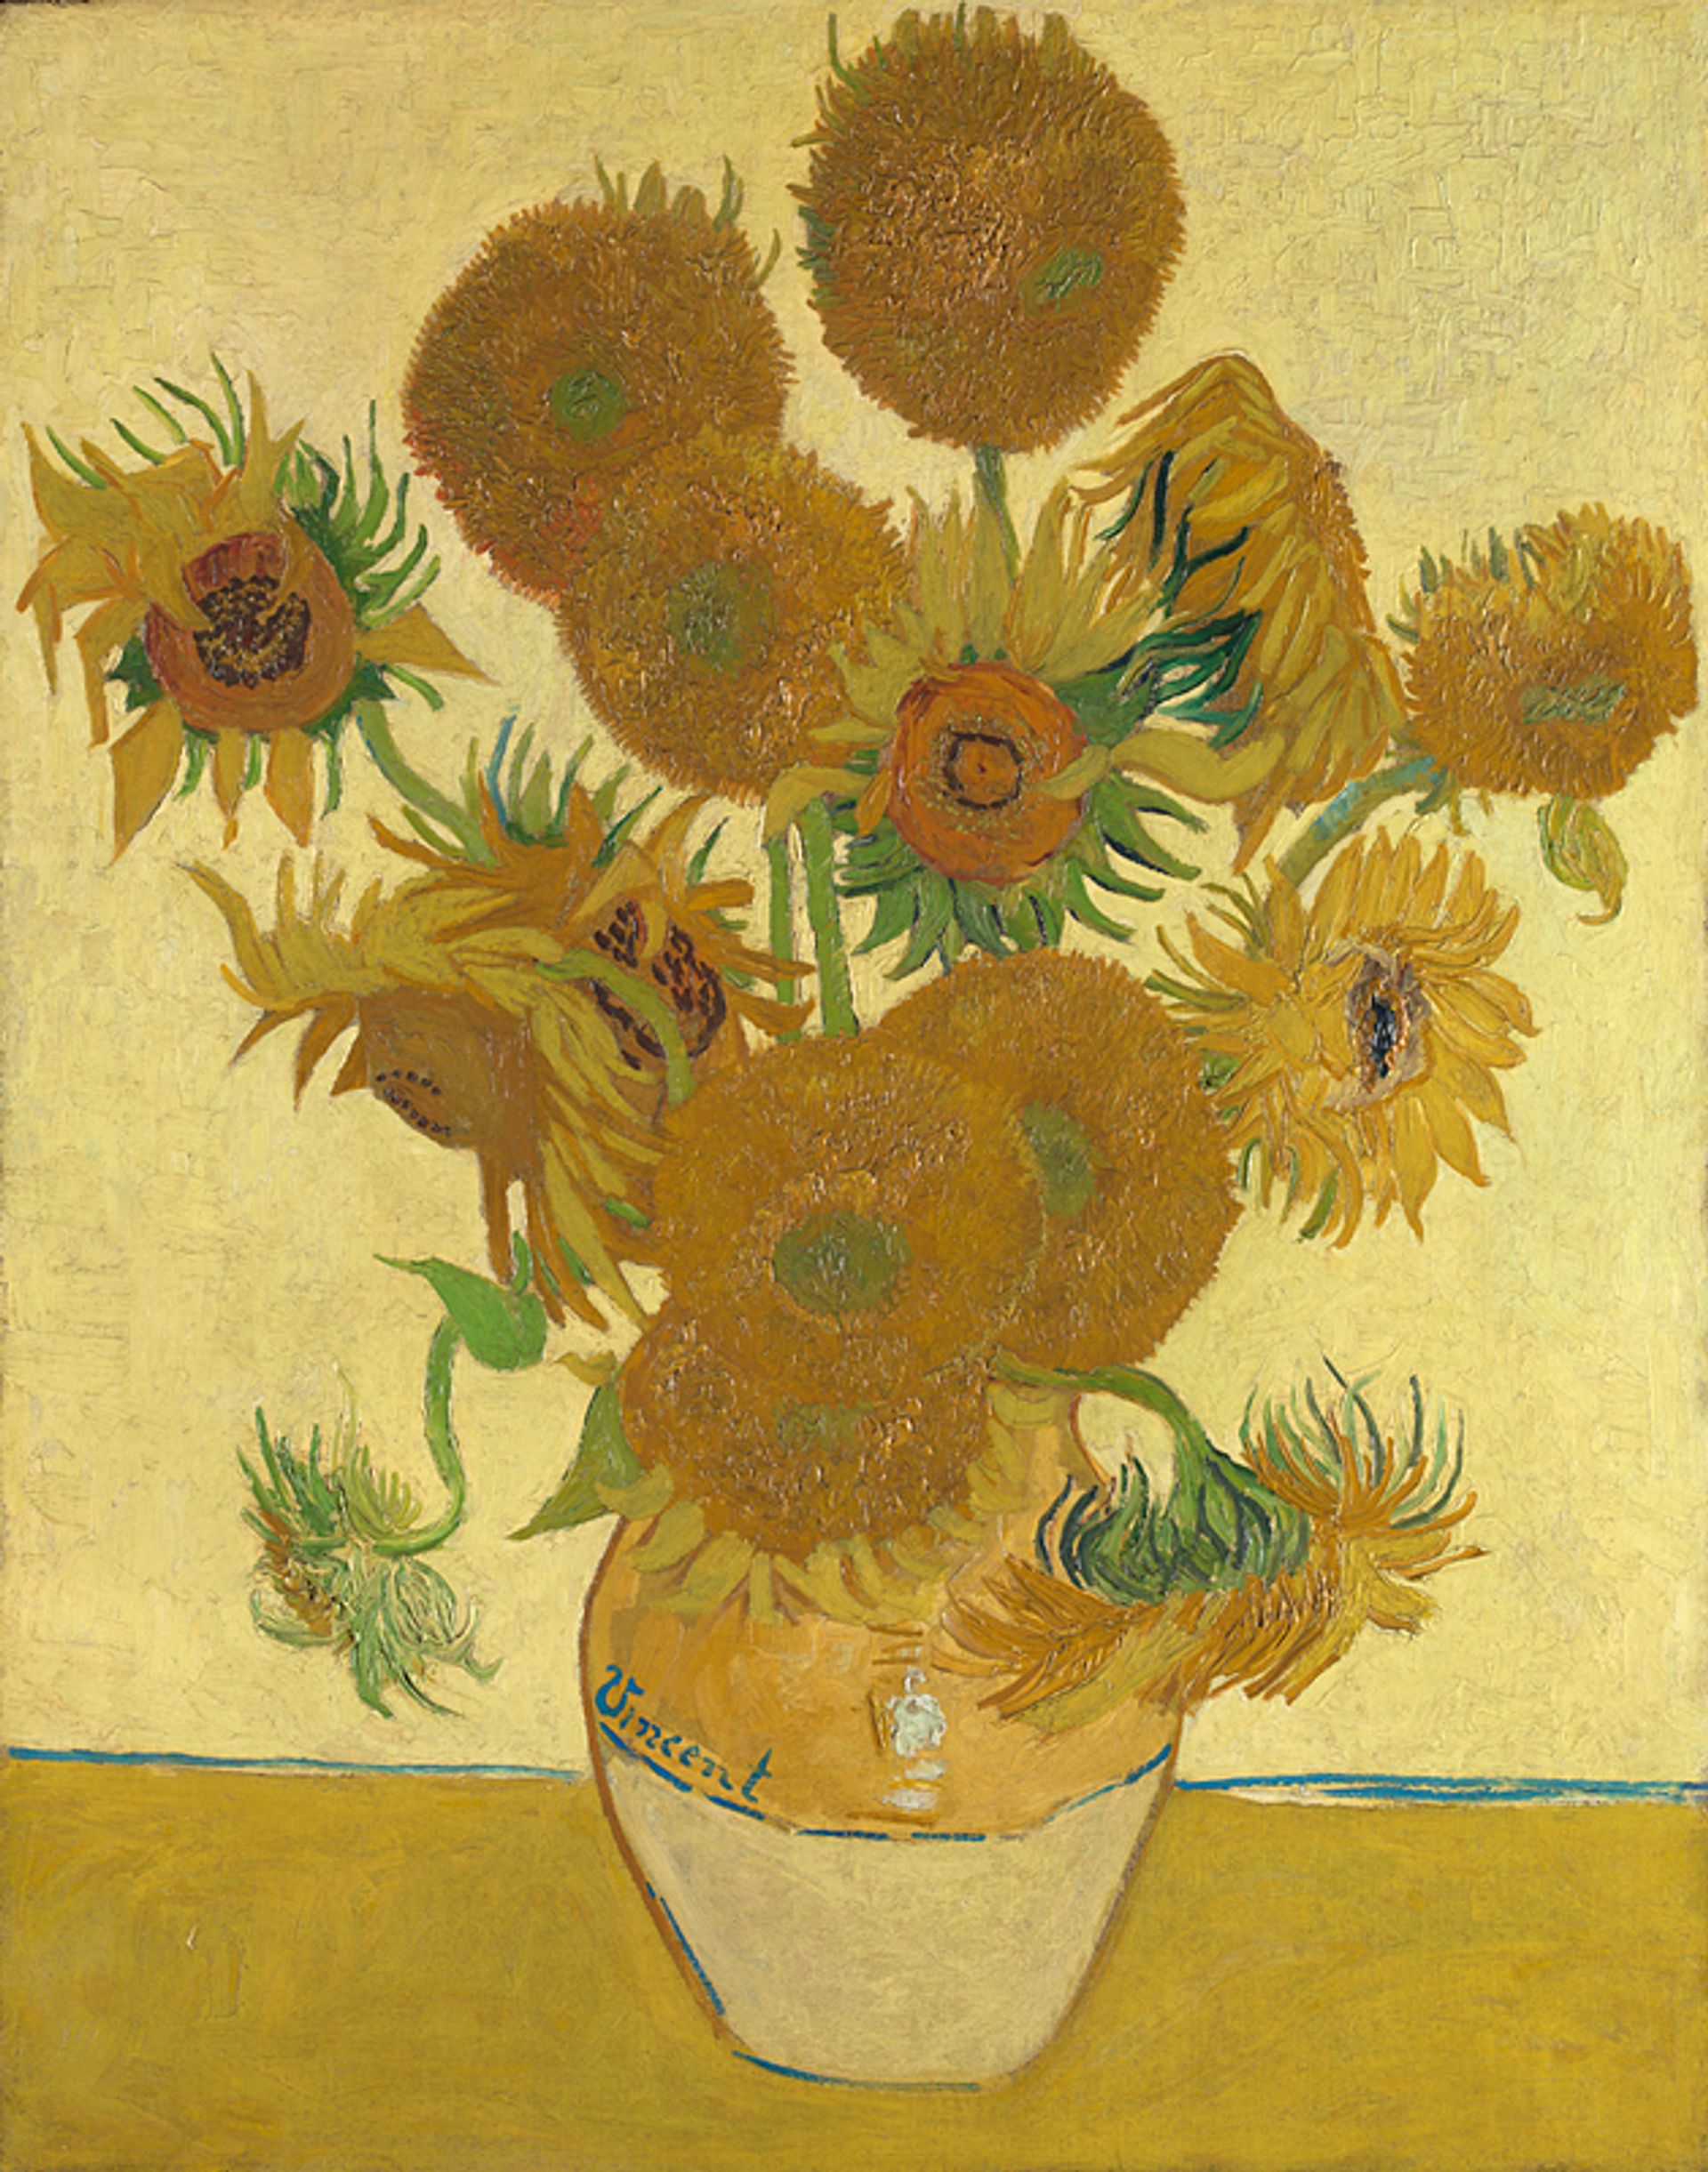 London's National Gallery will stage a Van Gogh blockbuster as part of its 2024 bicentenary celebrations